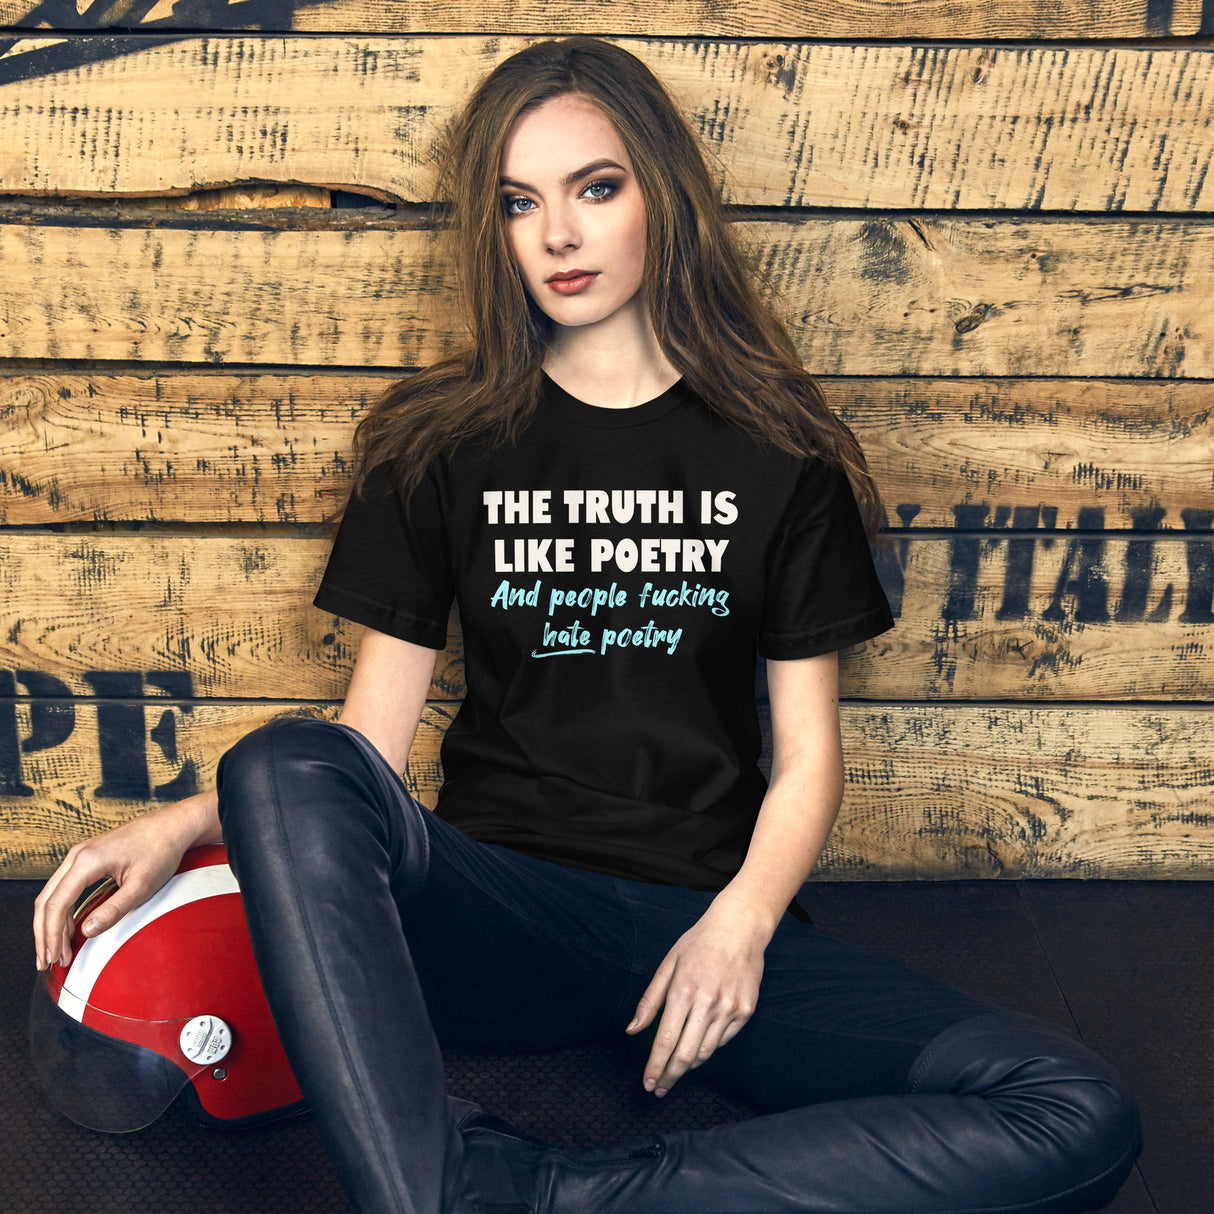 The Truth is Like Poetry Women's Shirt